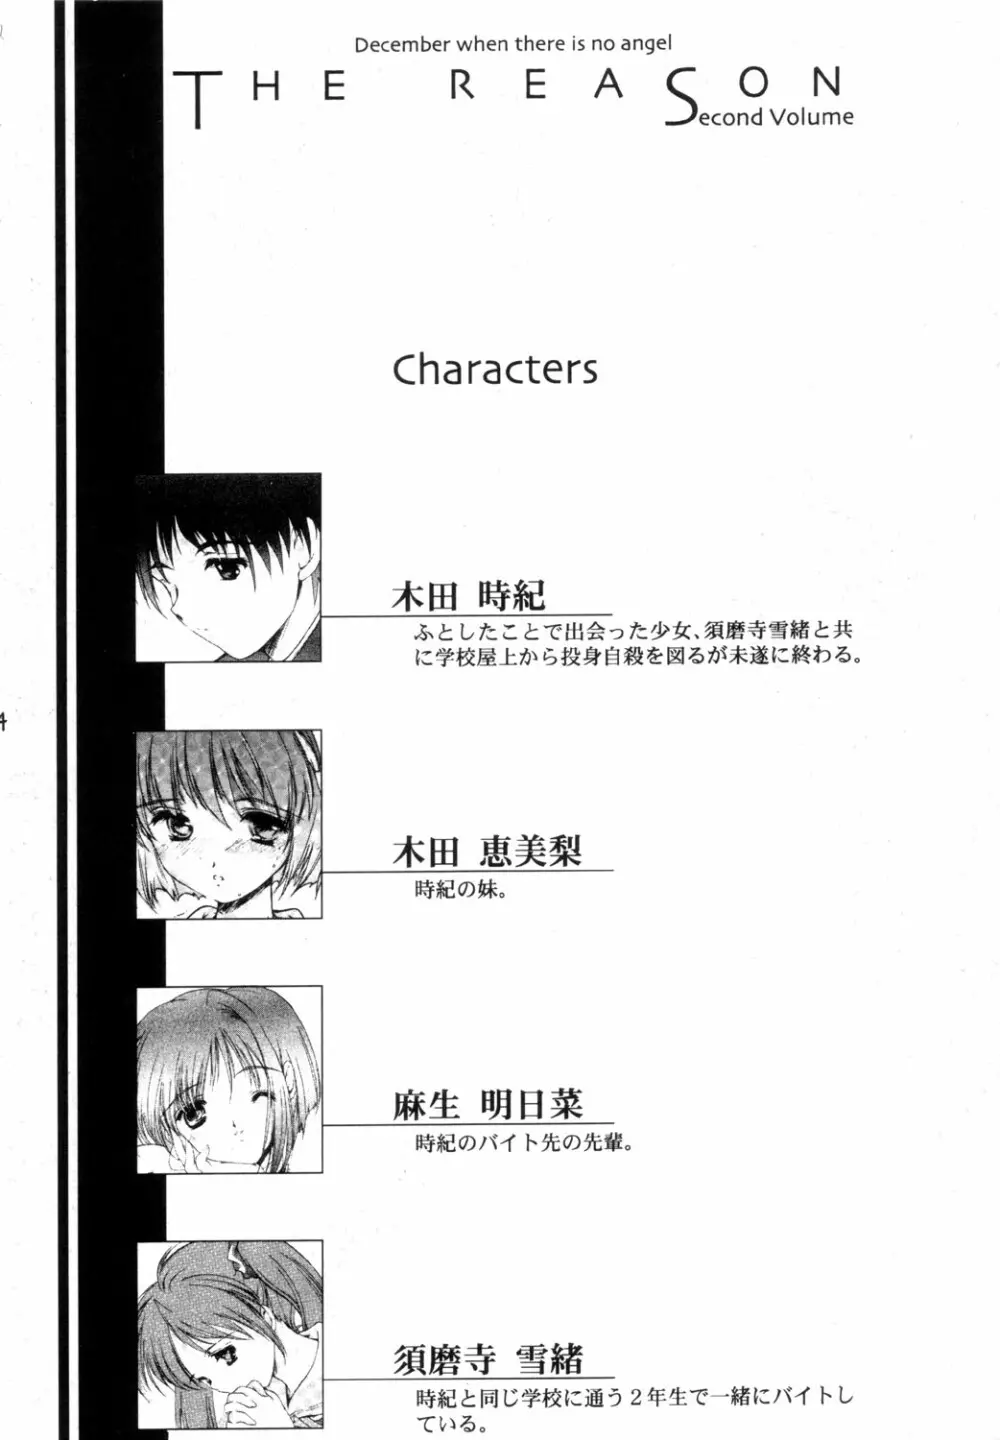 THE REASON Second Volume Page.3